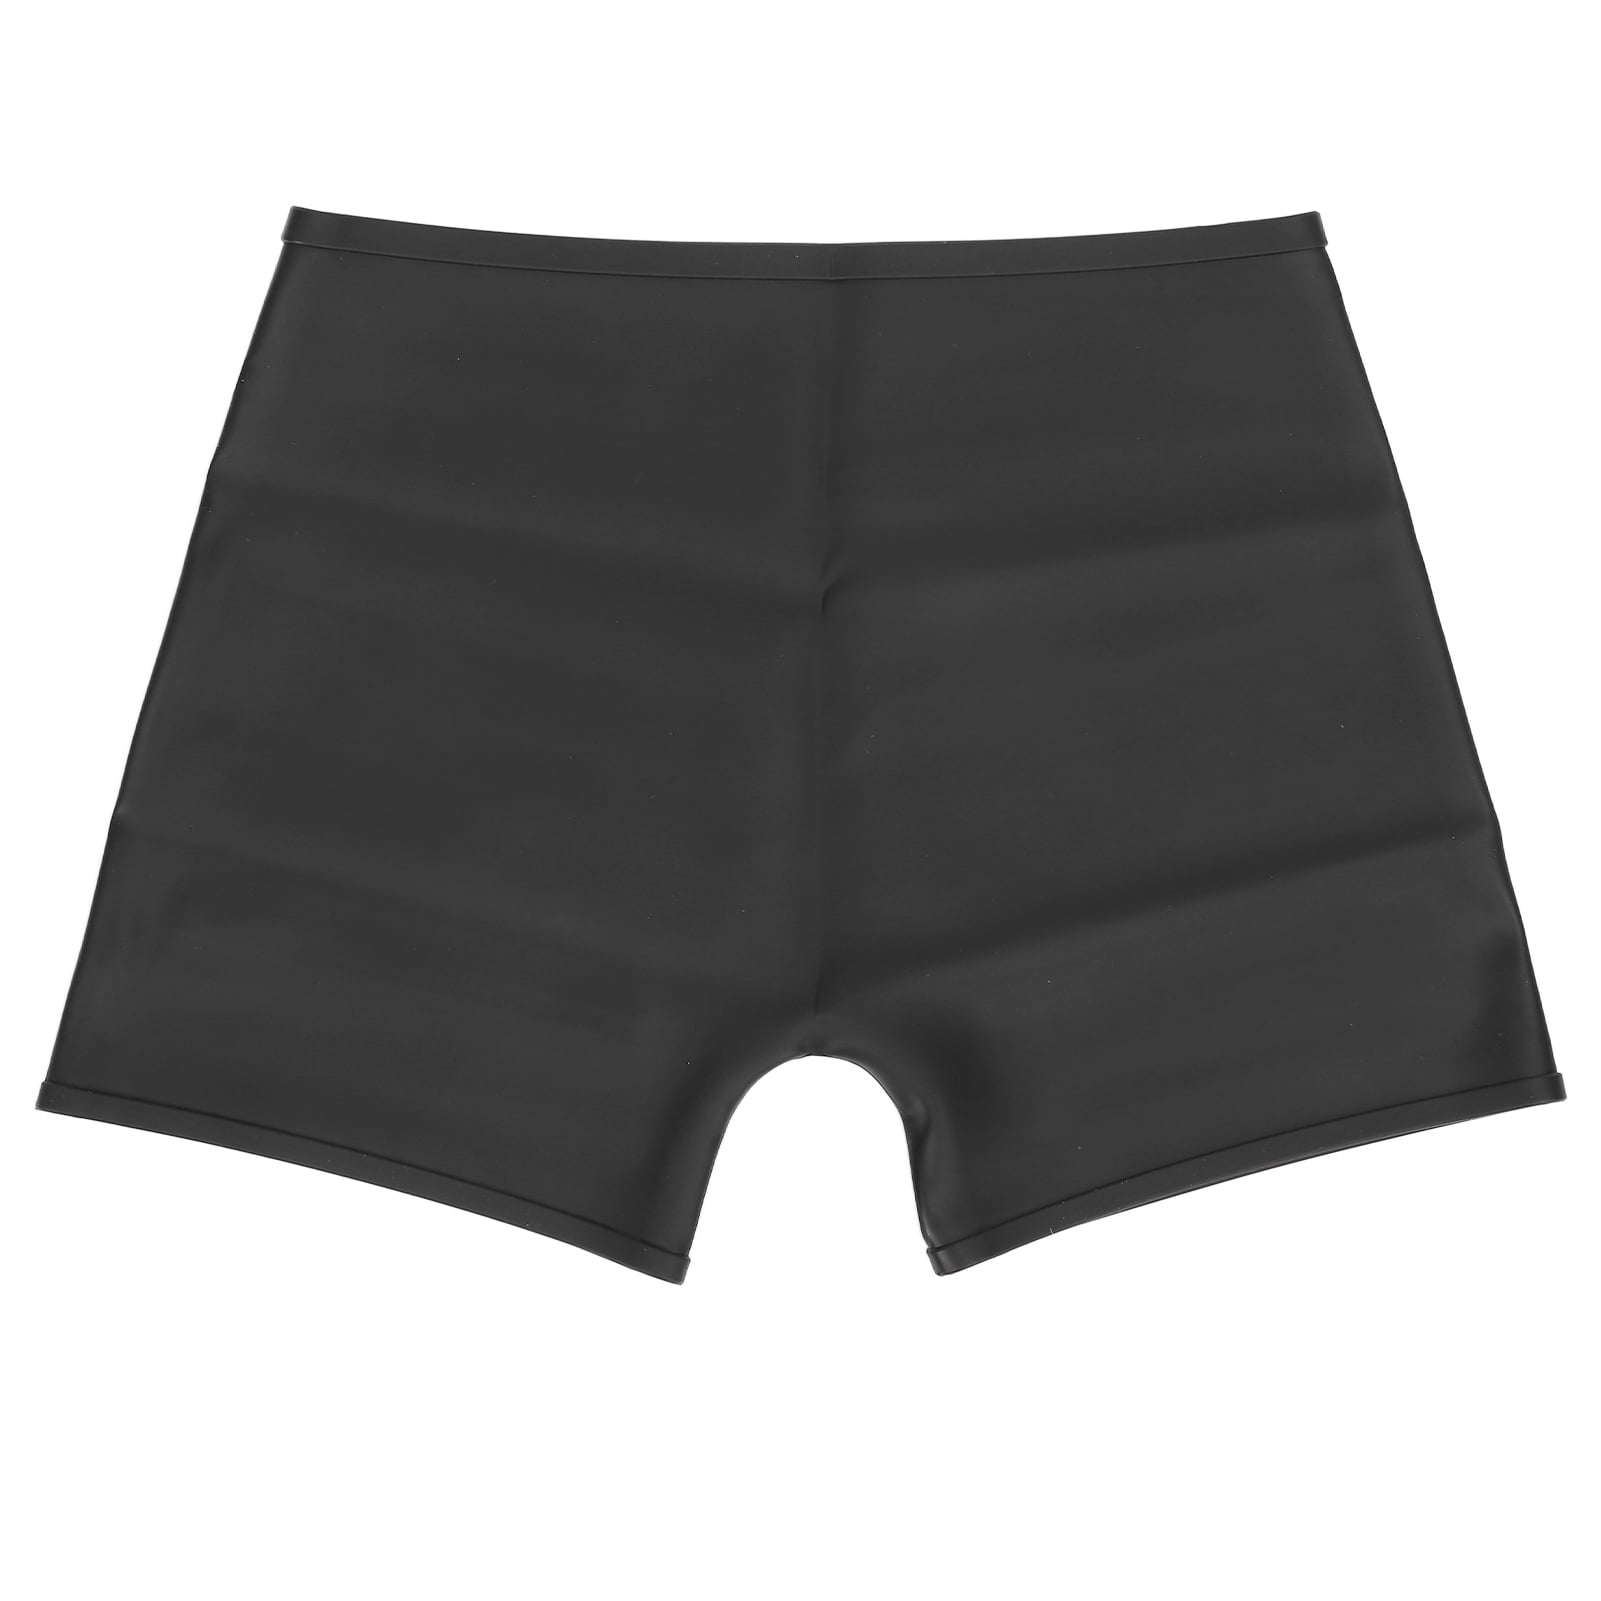 Silicone Swimming Trunks, Women Waterproof Physiological Menstrual